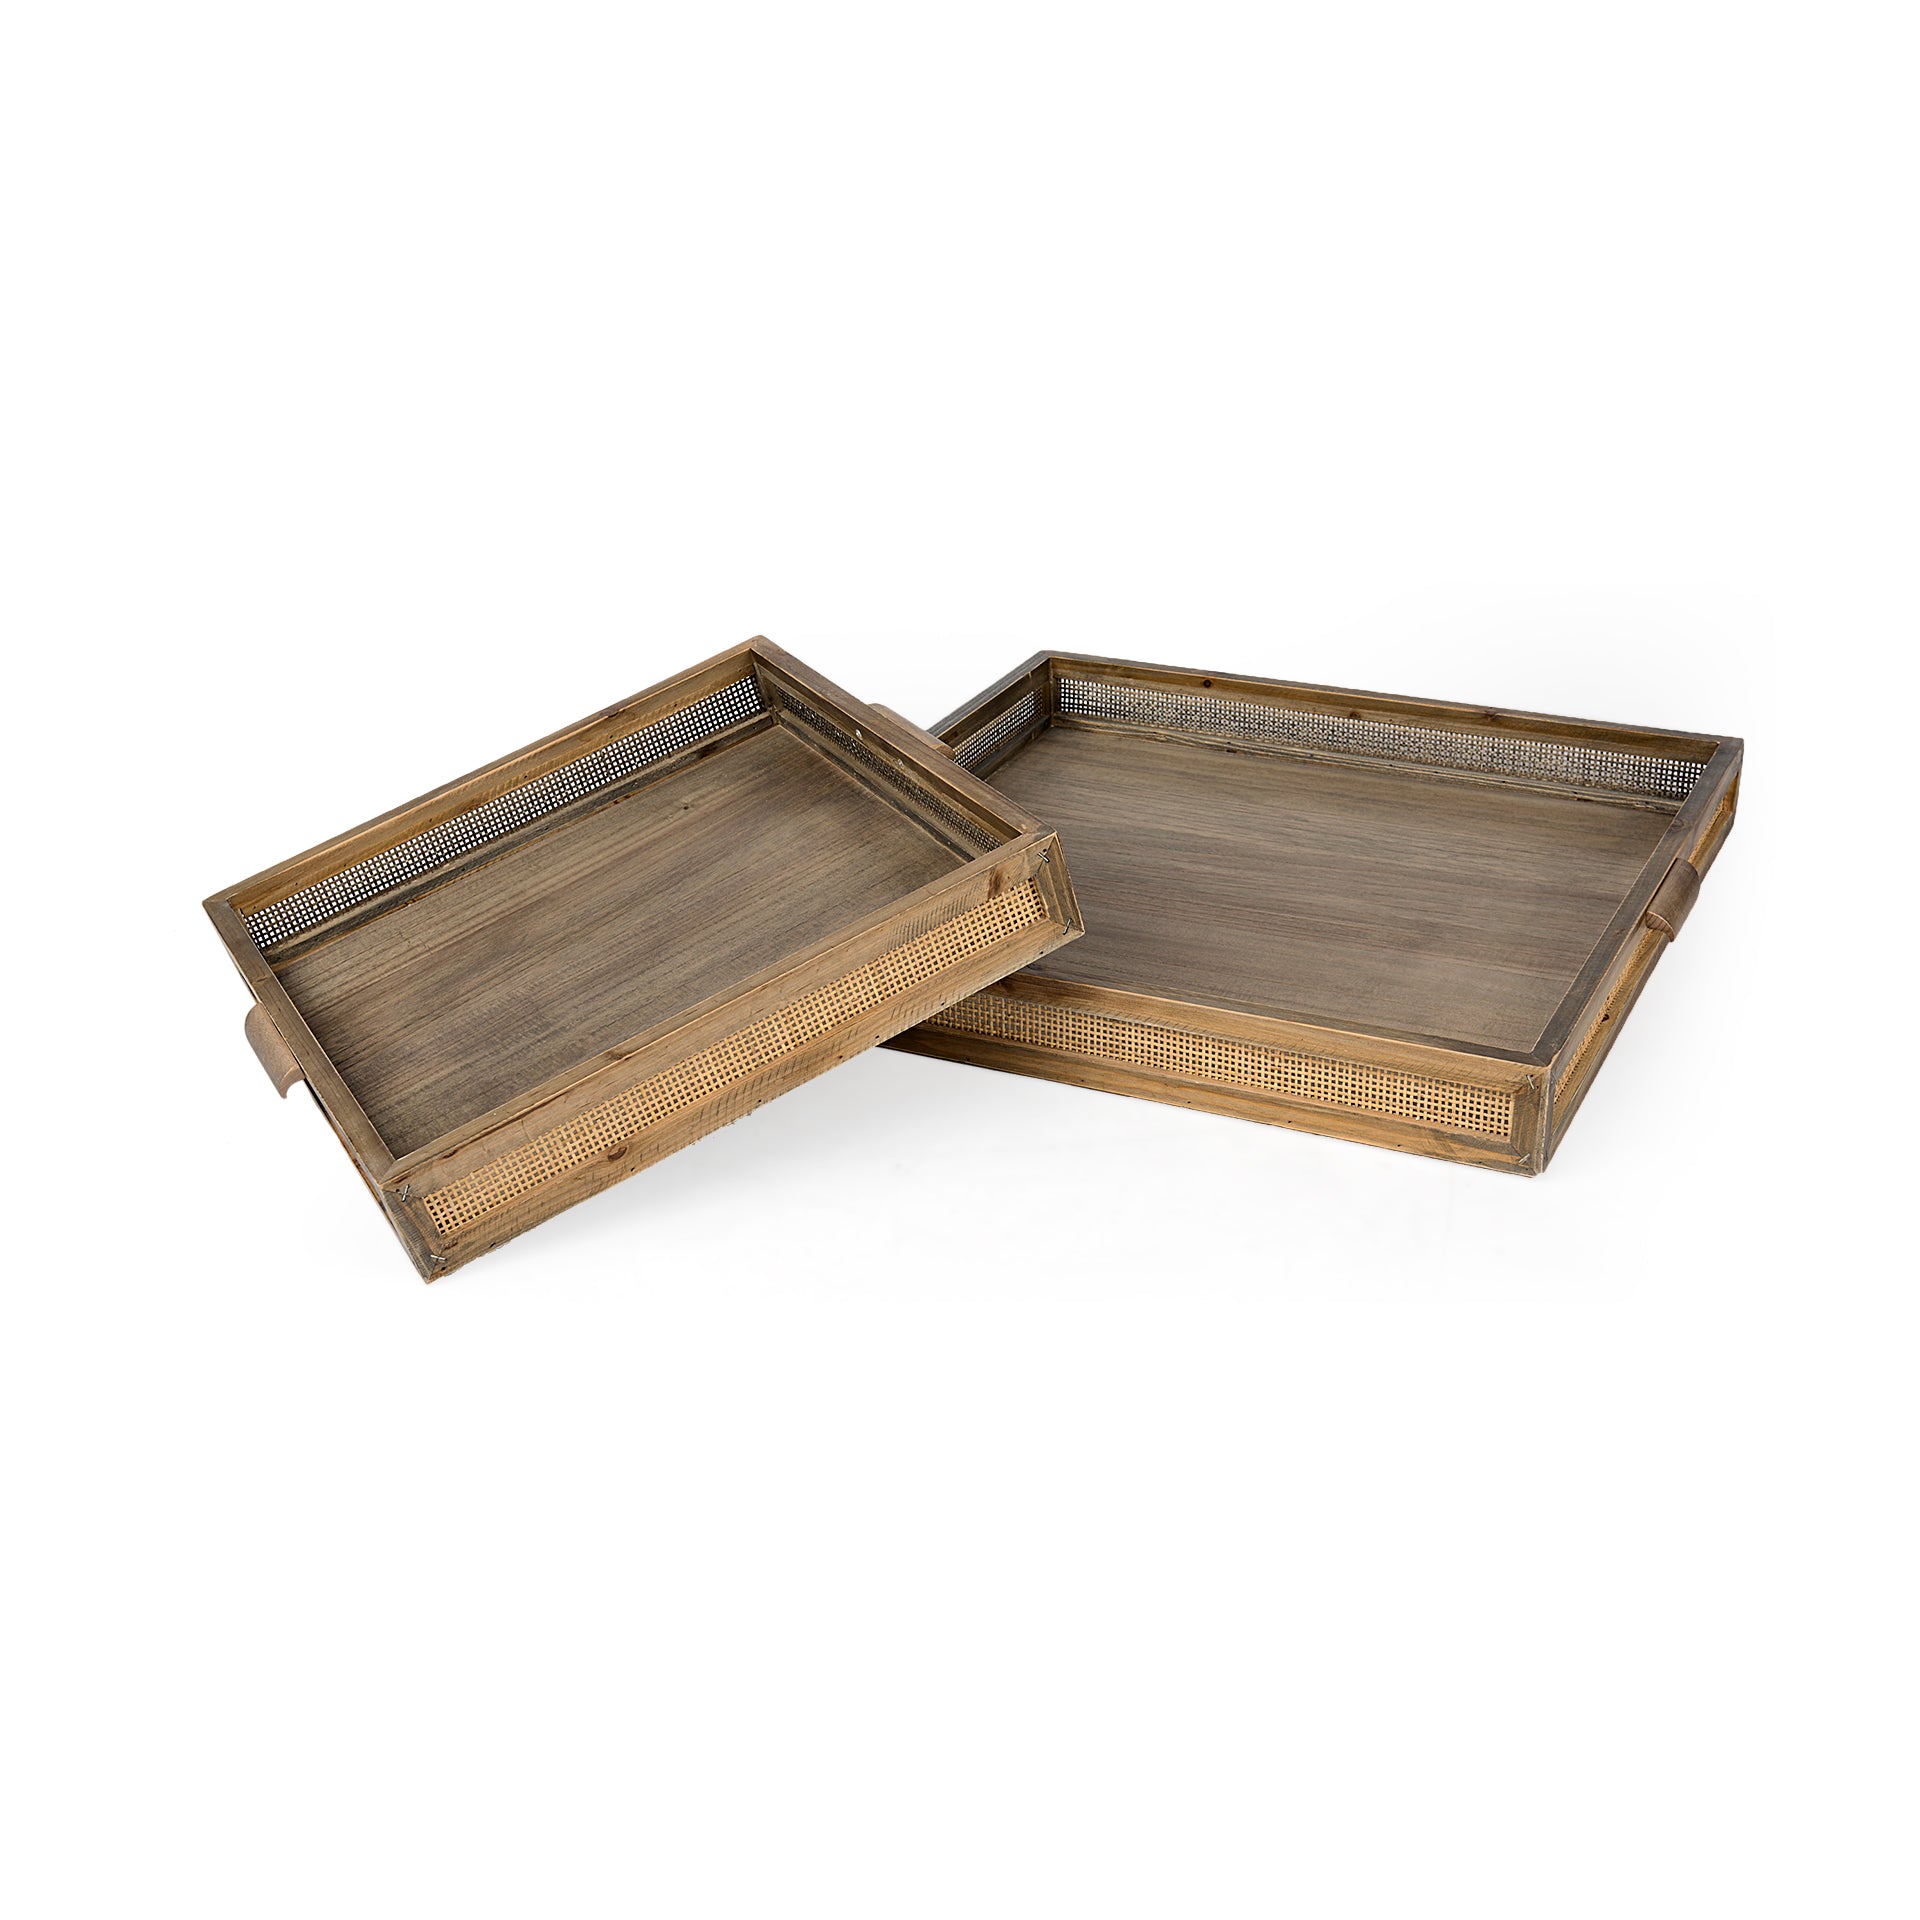 Sonny Tray - Brown Wood and Wicker Square Trays